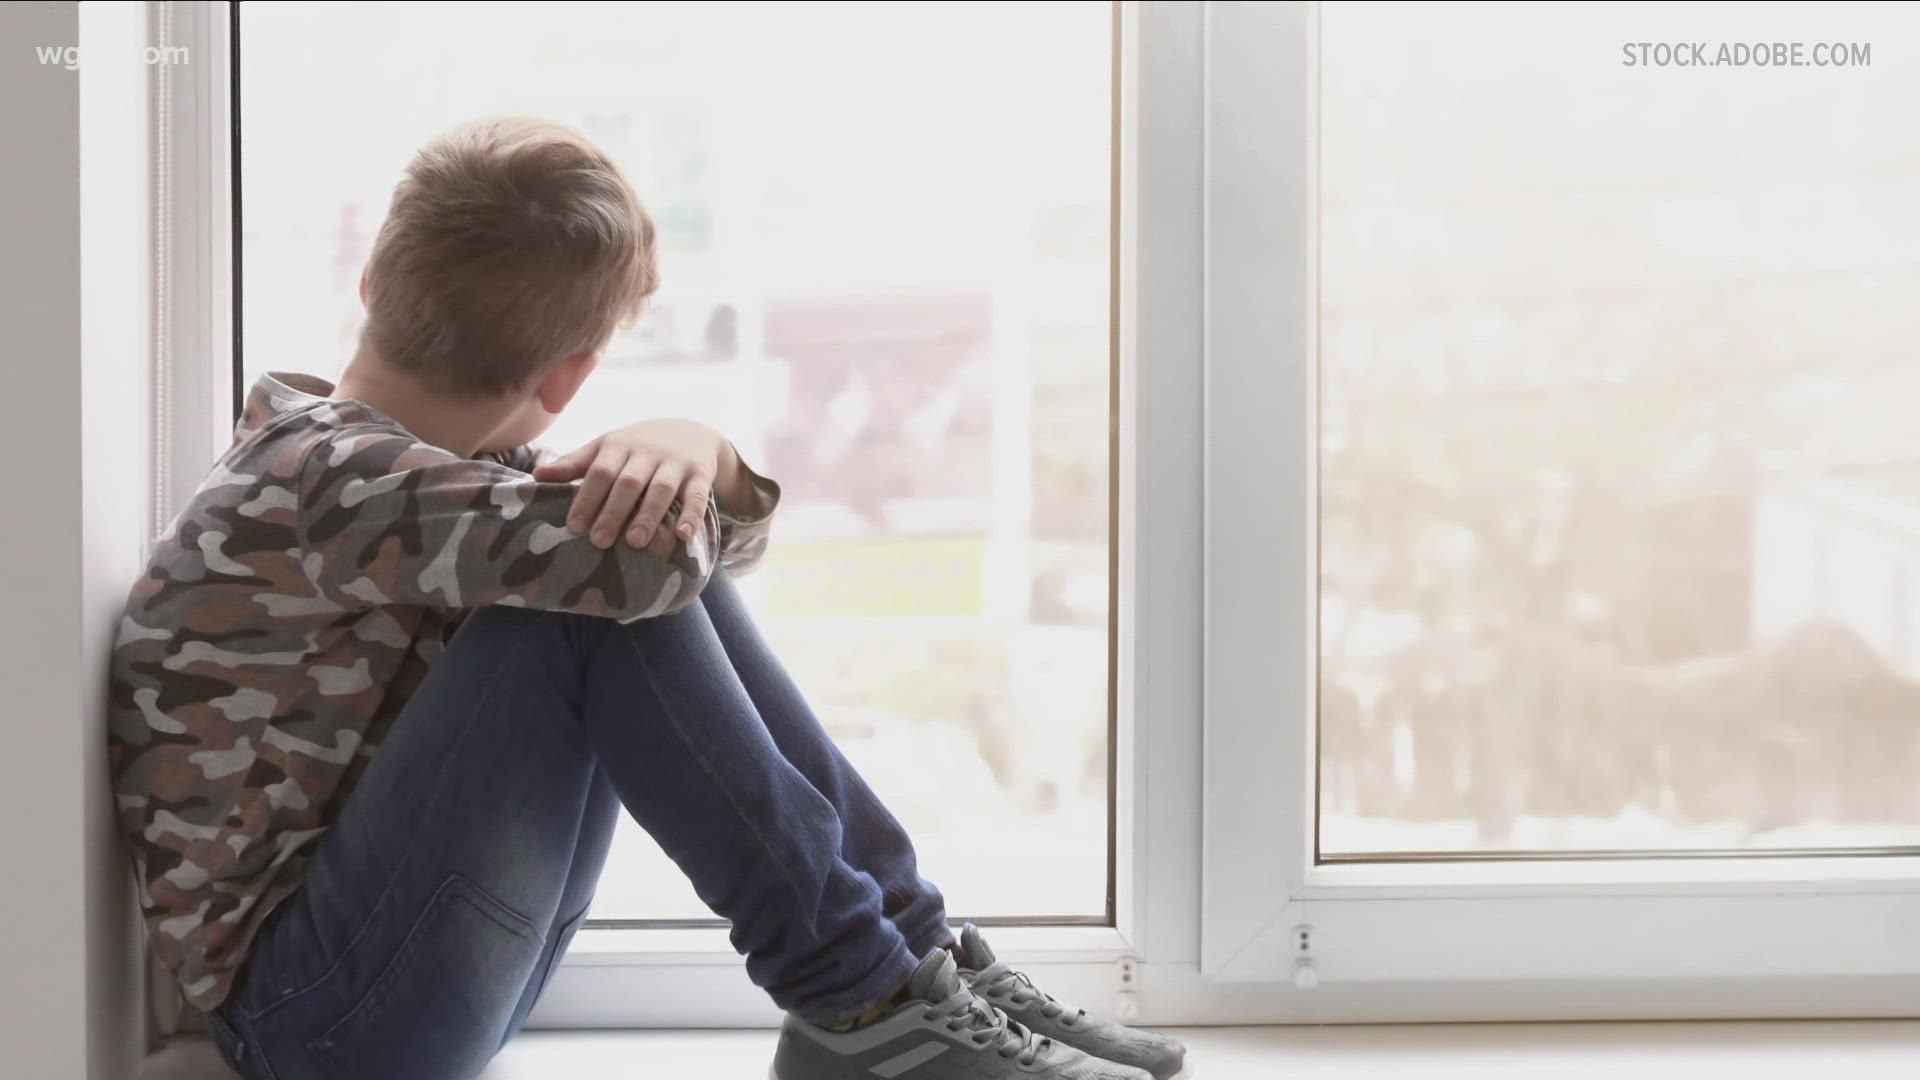 A local expert tells @ On Your Side funding can help make a difference for kids who struggle with mental health, but only if the program is sustainable.